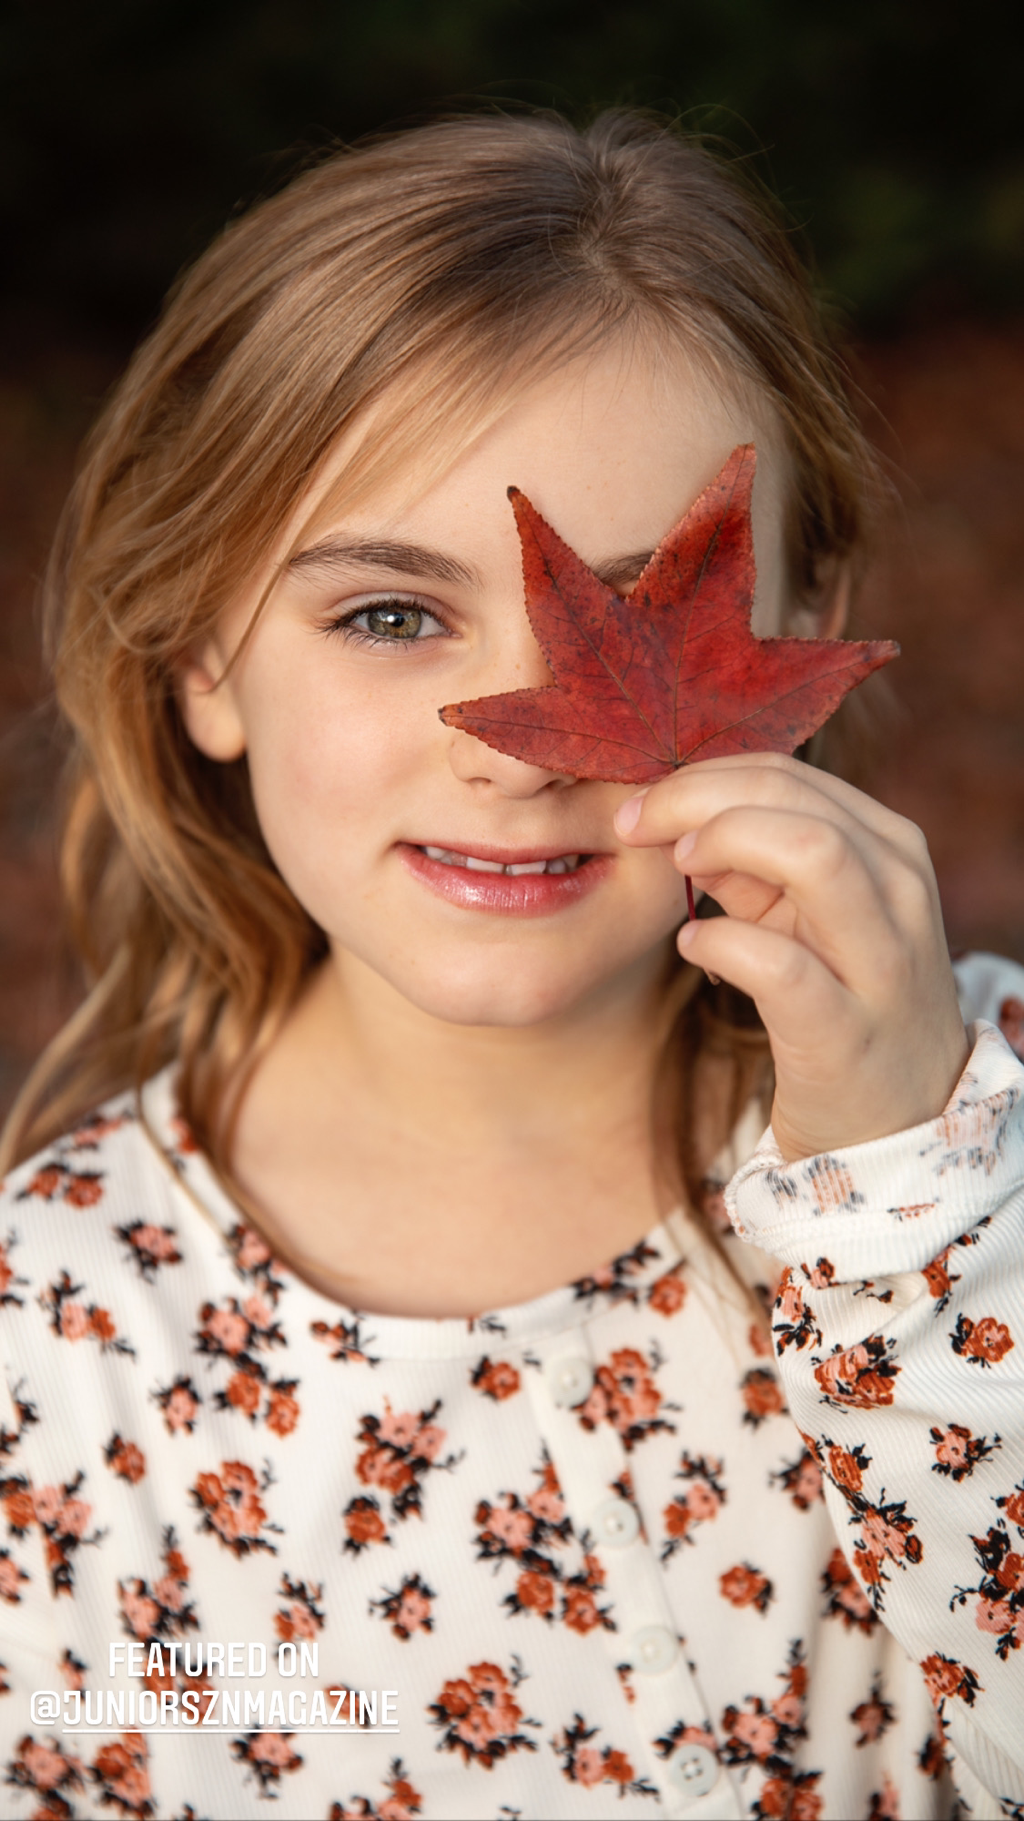 little girl holding fall red leaf in front of her eye